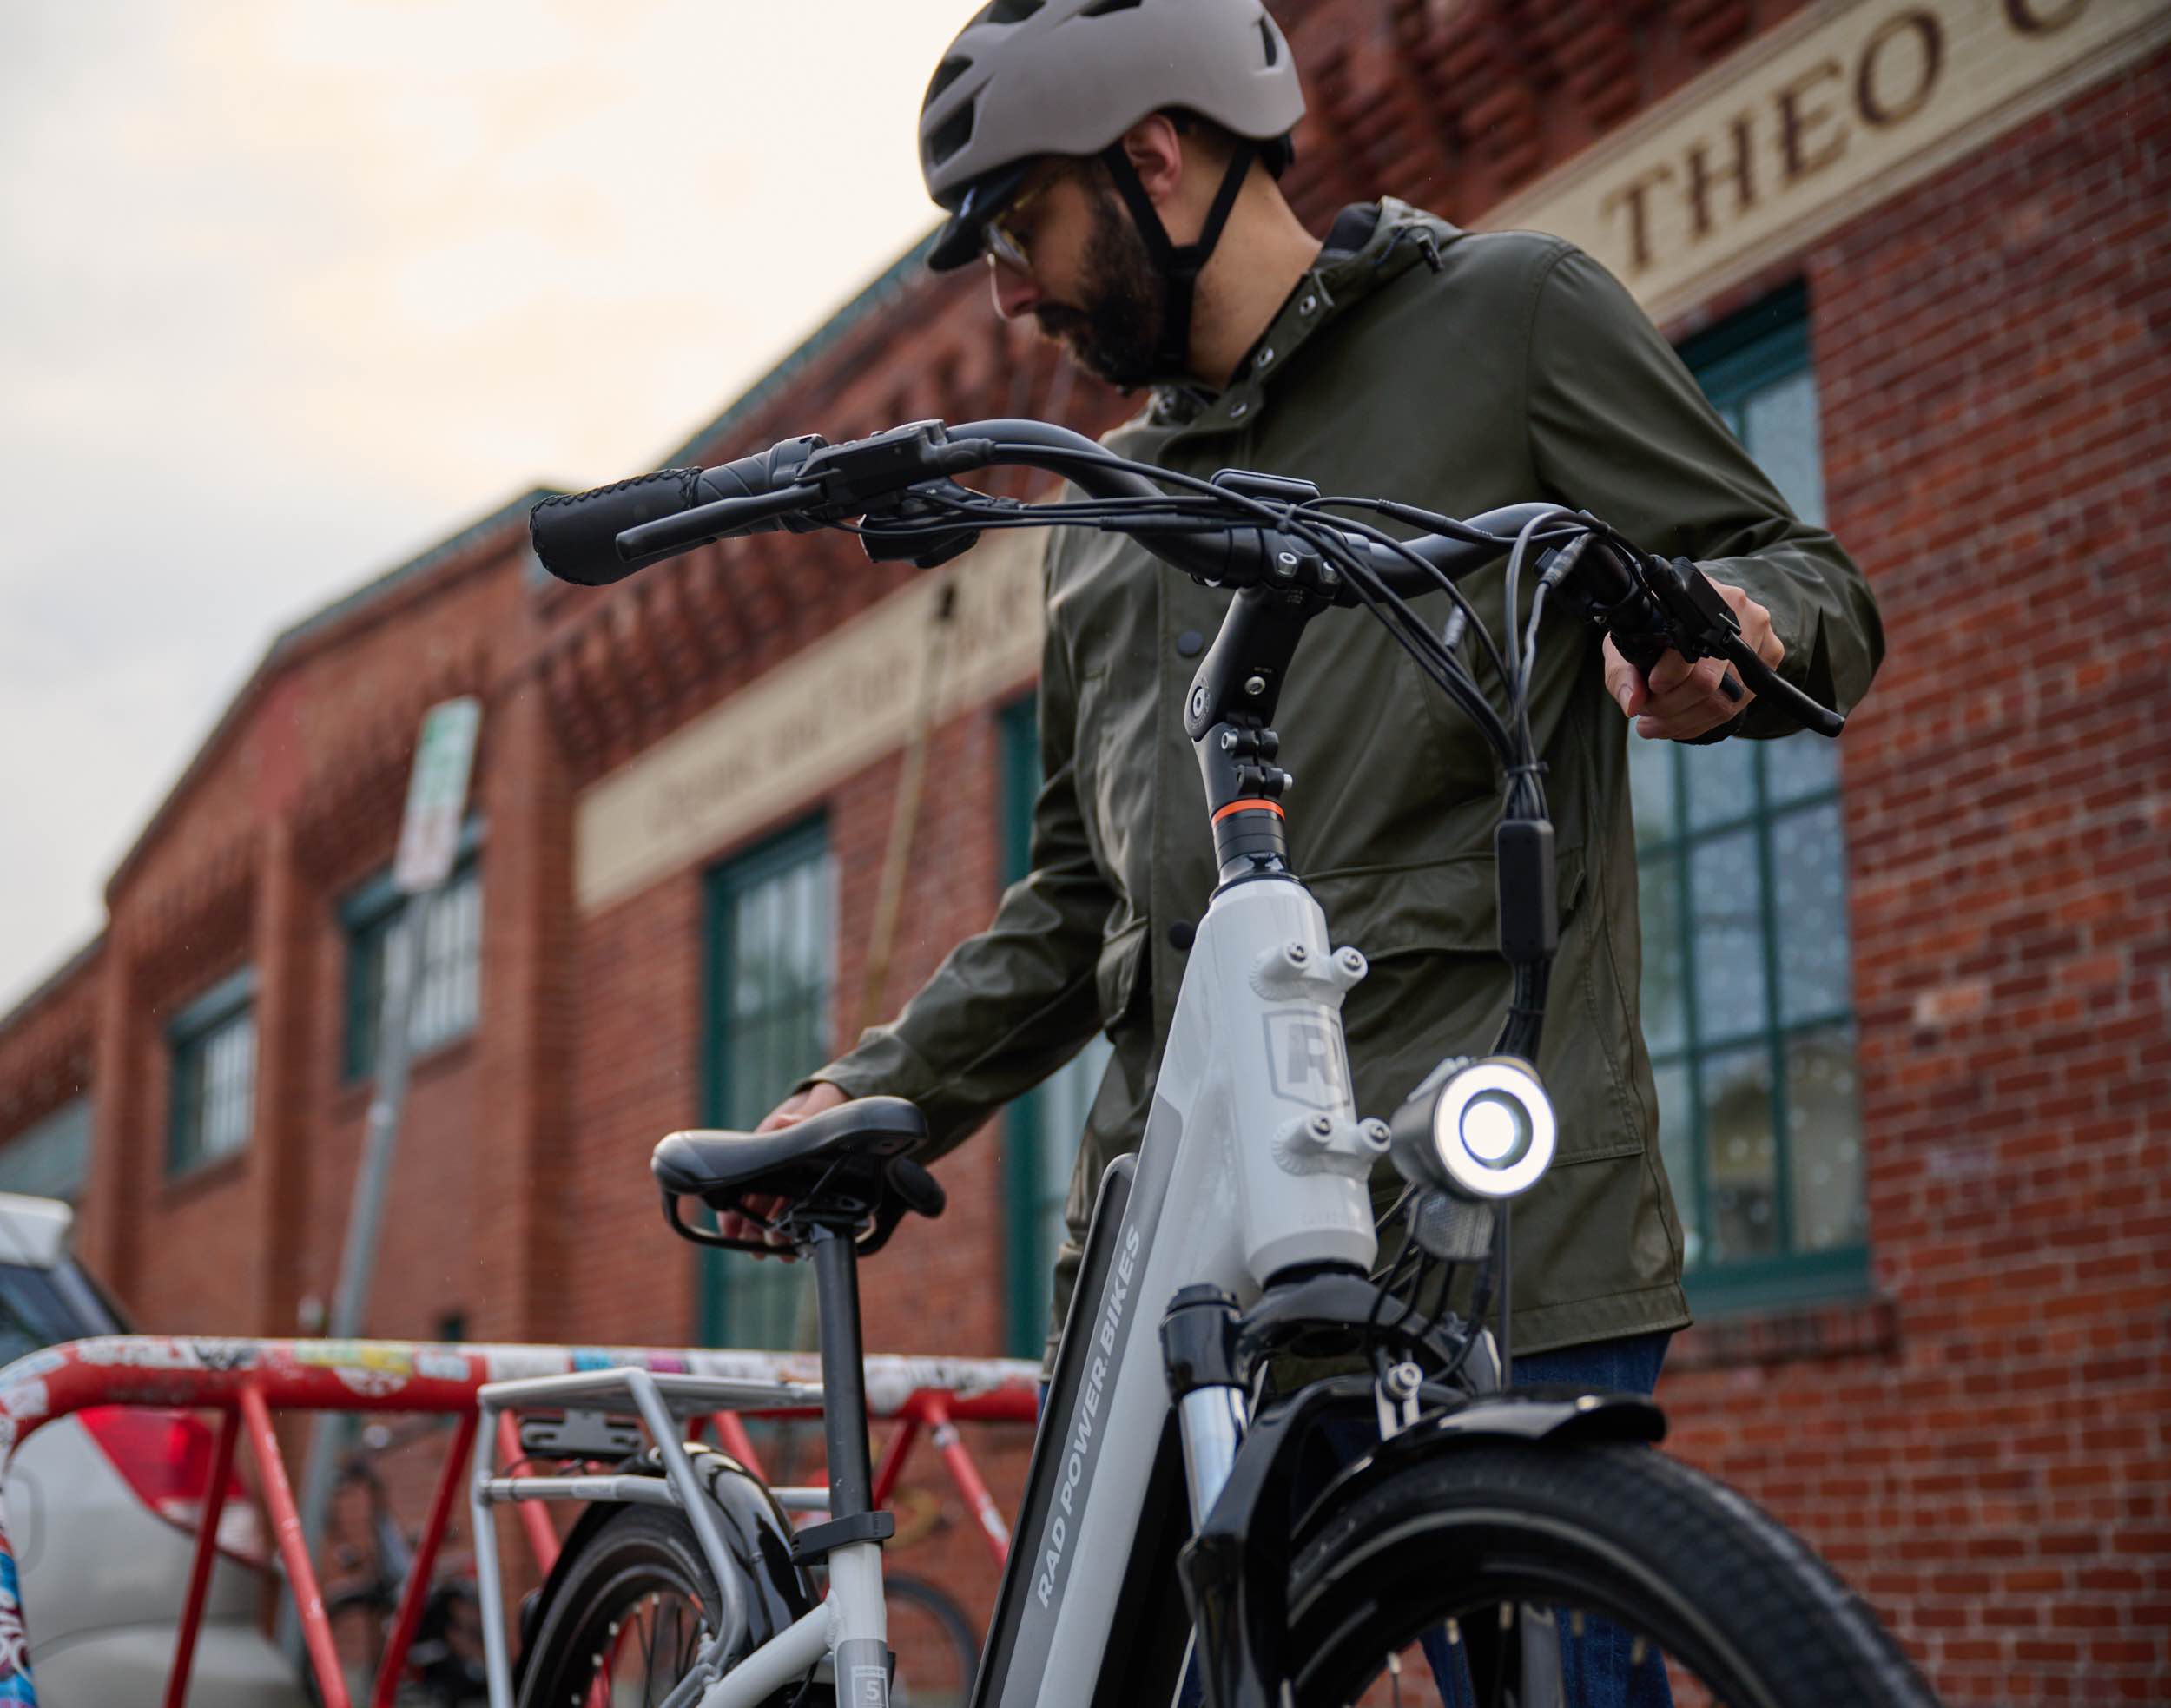 A man in a green coat parks his ebike outside by a bike rack. A red brick building is in the background.